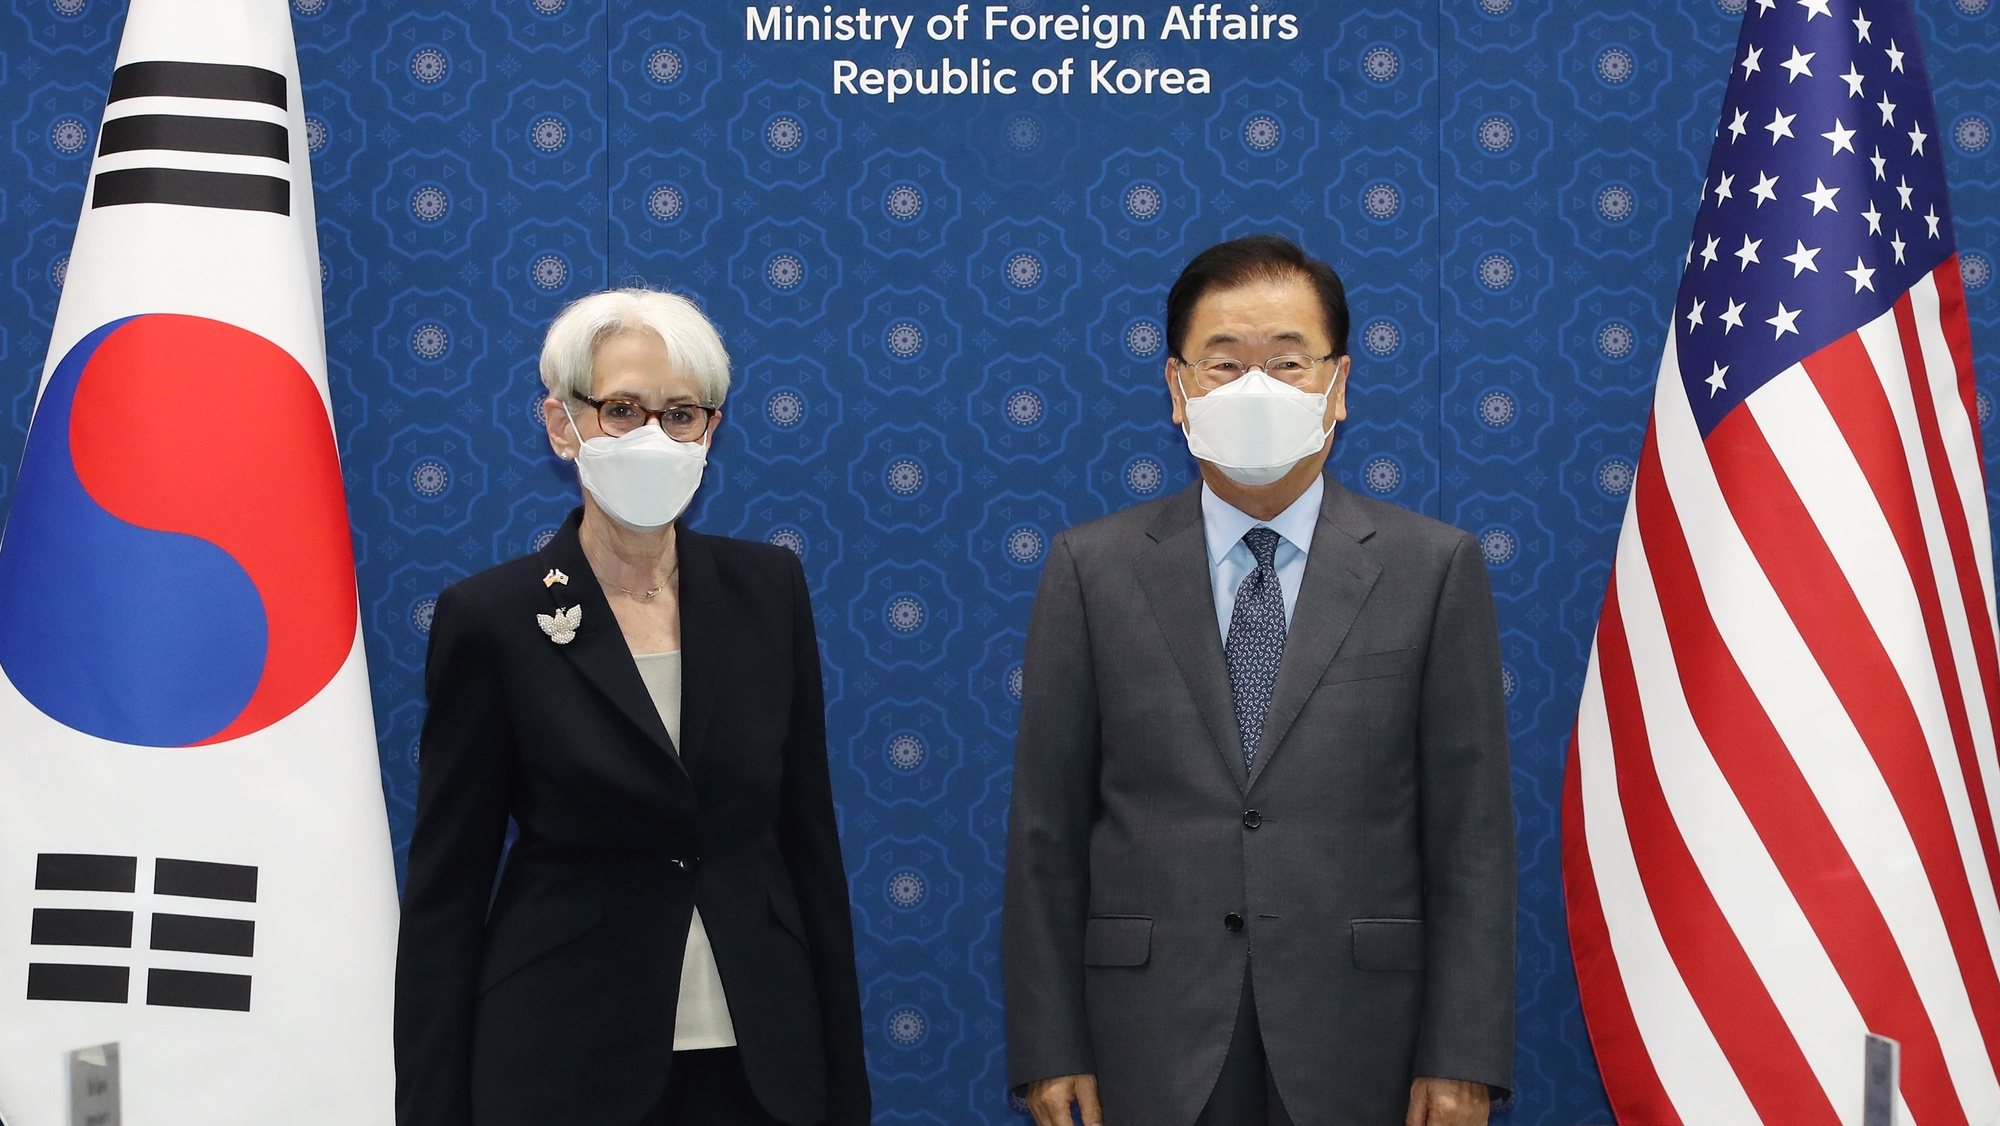 epa09357544 South Korean Foreign Minister Chung Eui-yong (R) poses for a photo with US Deputy Secretary of State Wendy Sherman (L) during their meeting at the foreign ministry in Seoul, South Korea, 22 July 2021.  EPA/YONHAP SOUTH KOREA OUT